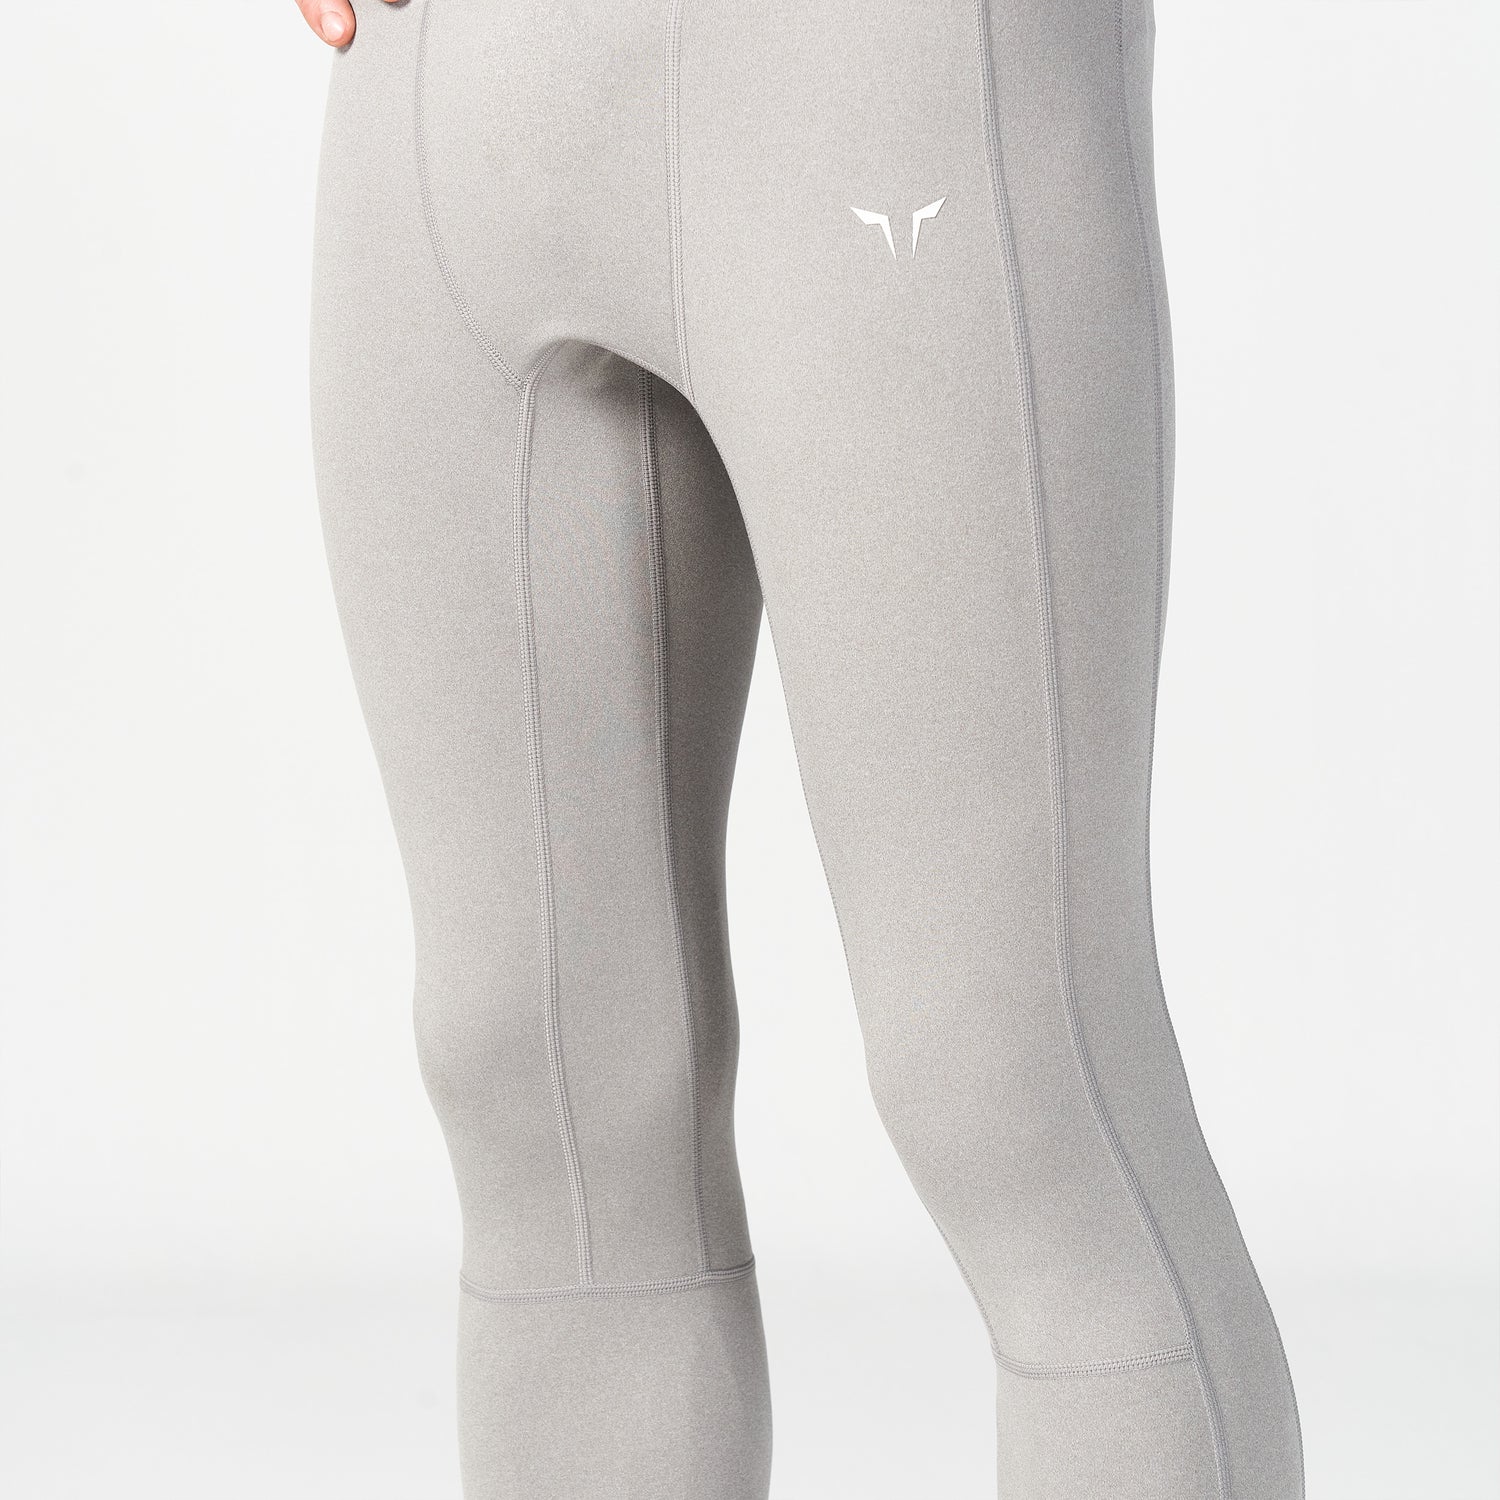 AE, Core ProTech Tights - Grey Marl, Gym Tights Men